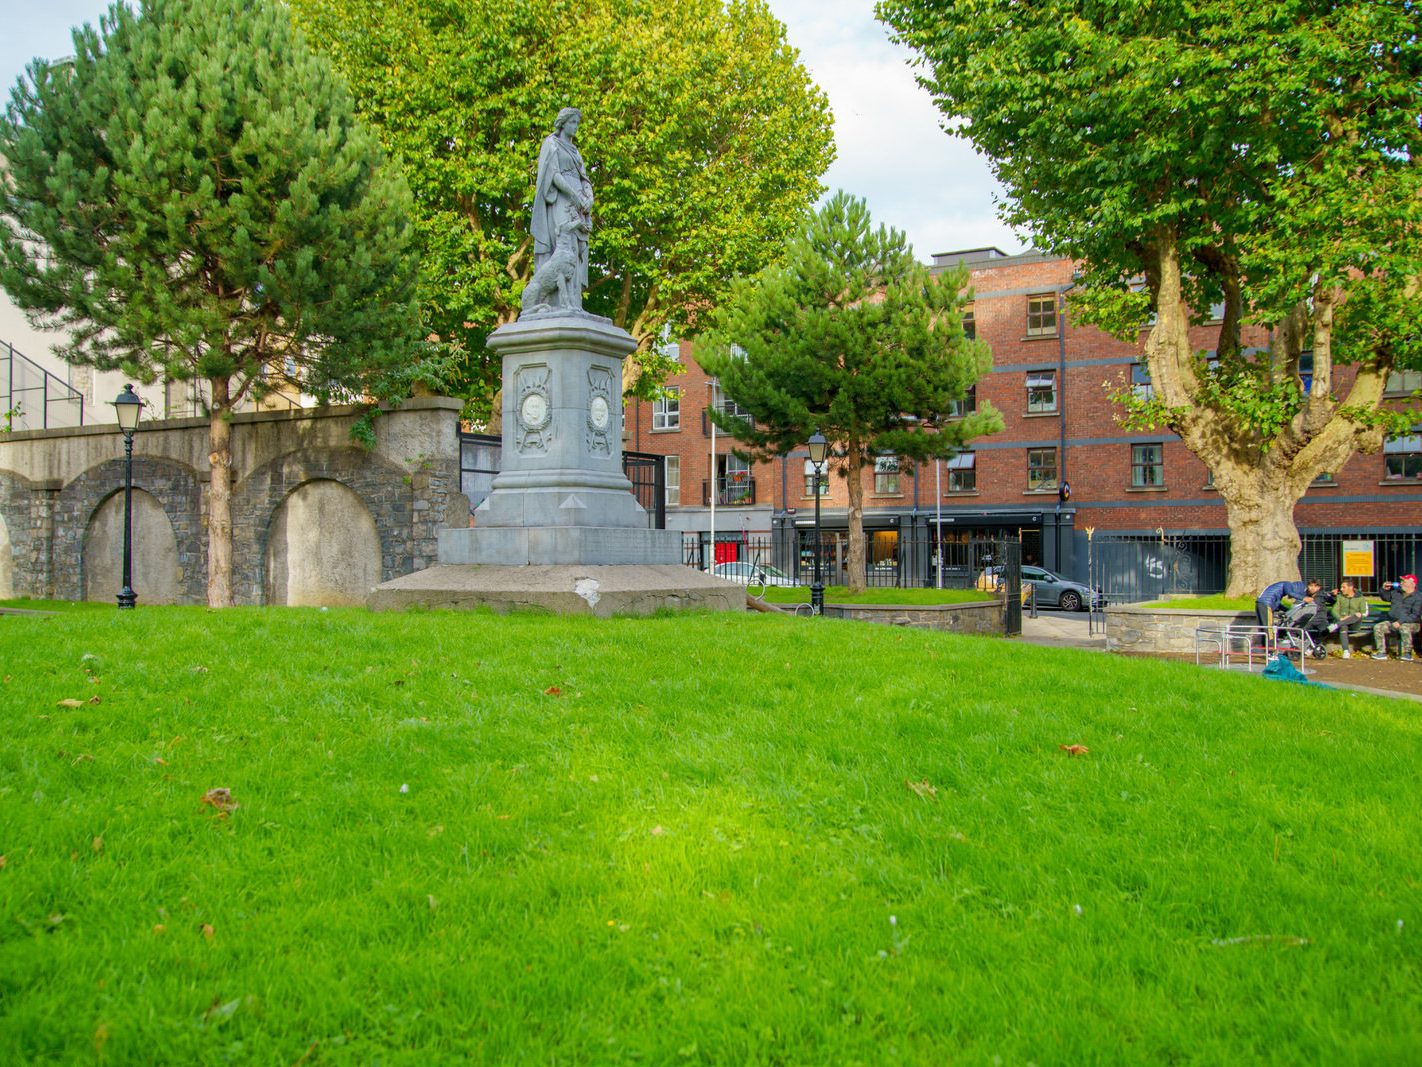 THE ÉIRE 1798 MEMORIAL [IS THE CENTRAL FEATURE OF SAINT MICHAN'S PARK IN DUBLIN] 004